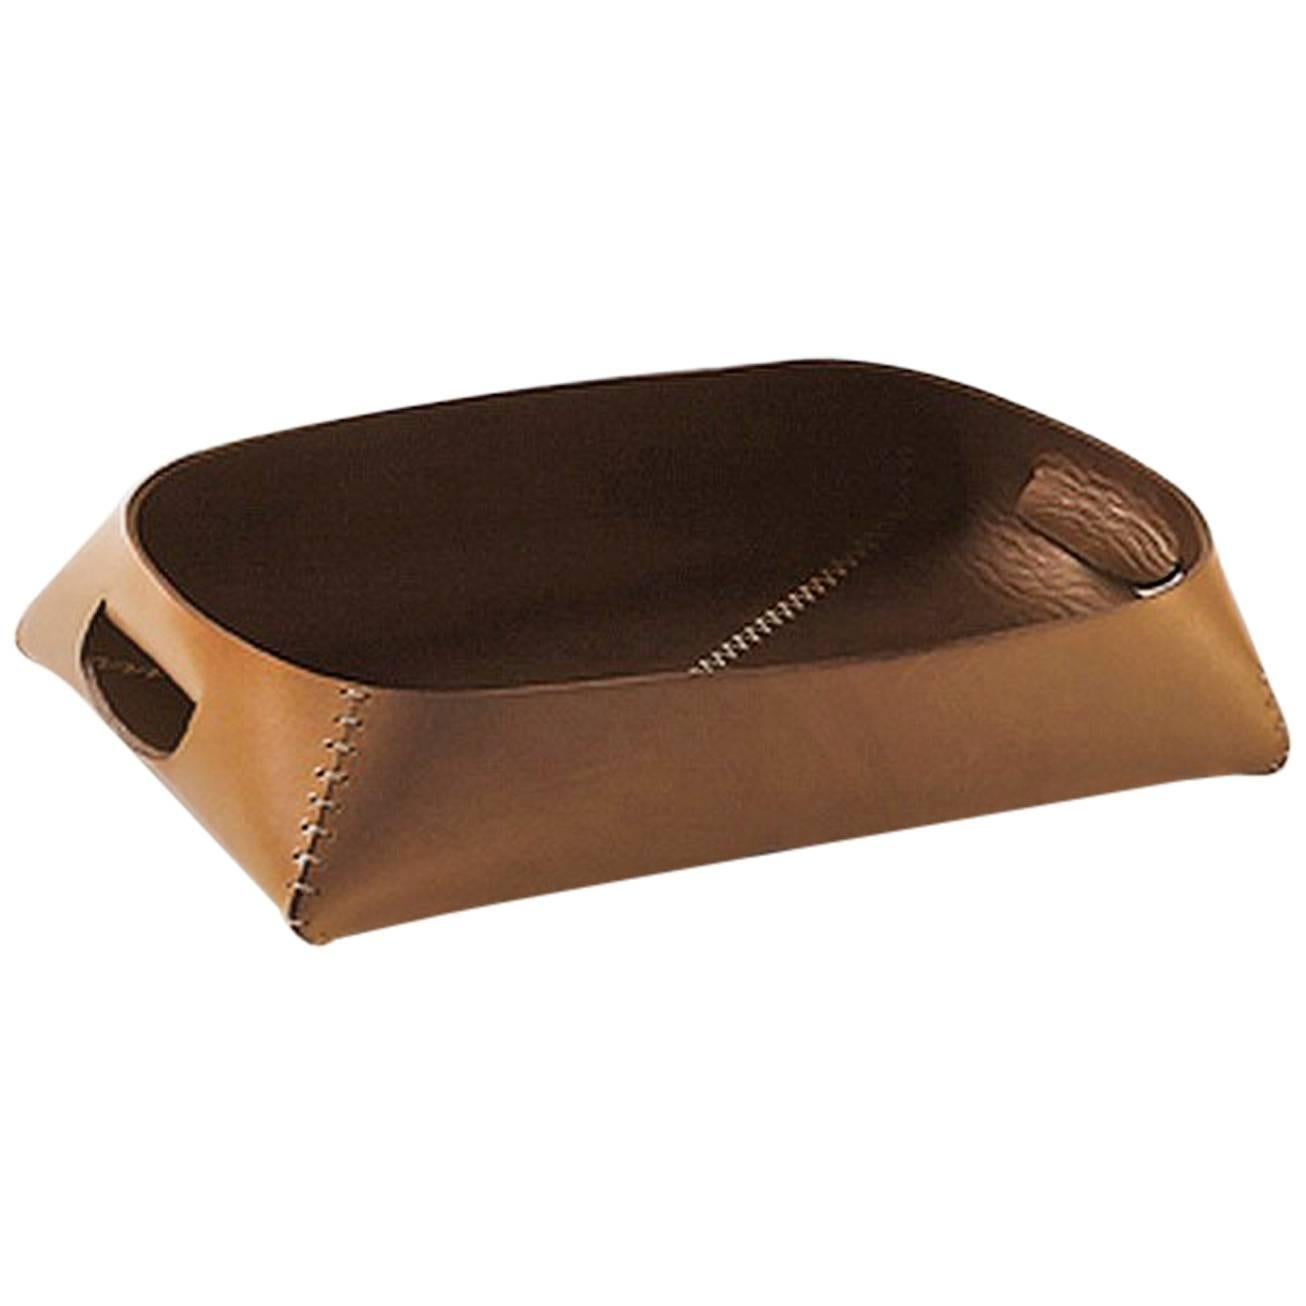 "Philippe" Leather Tray Designed by Claude Bouchard for Oscar Maschera